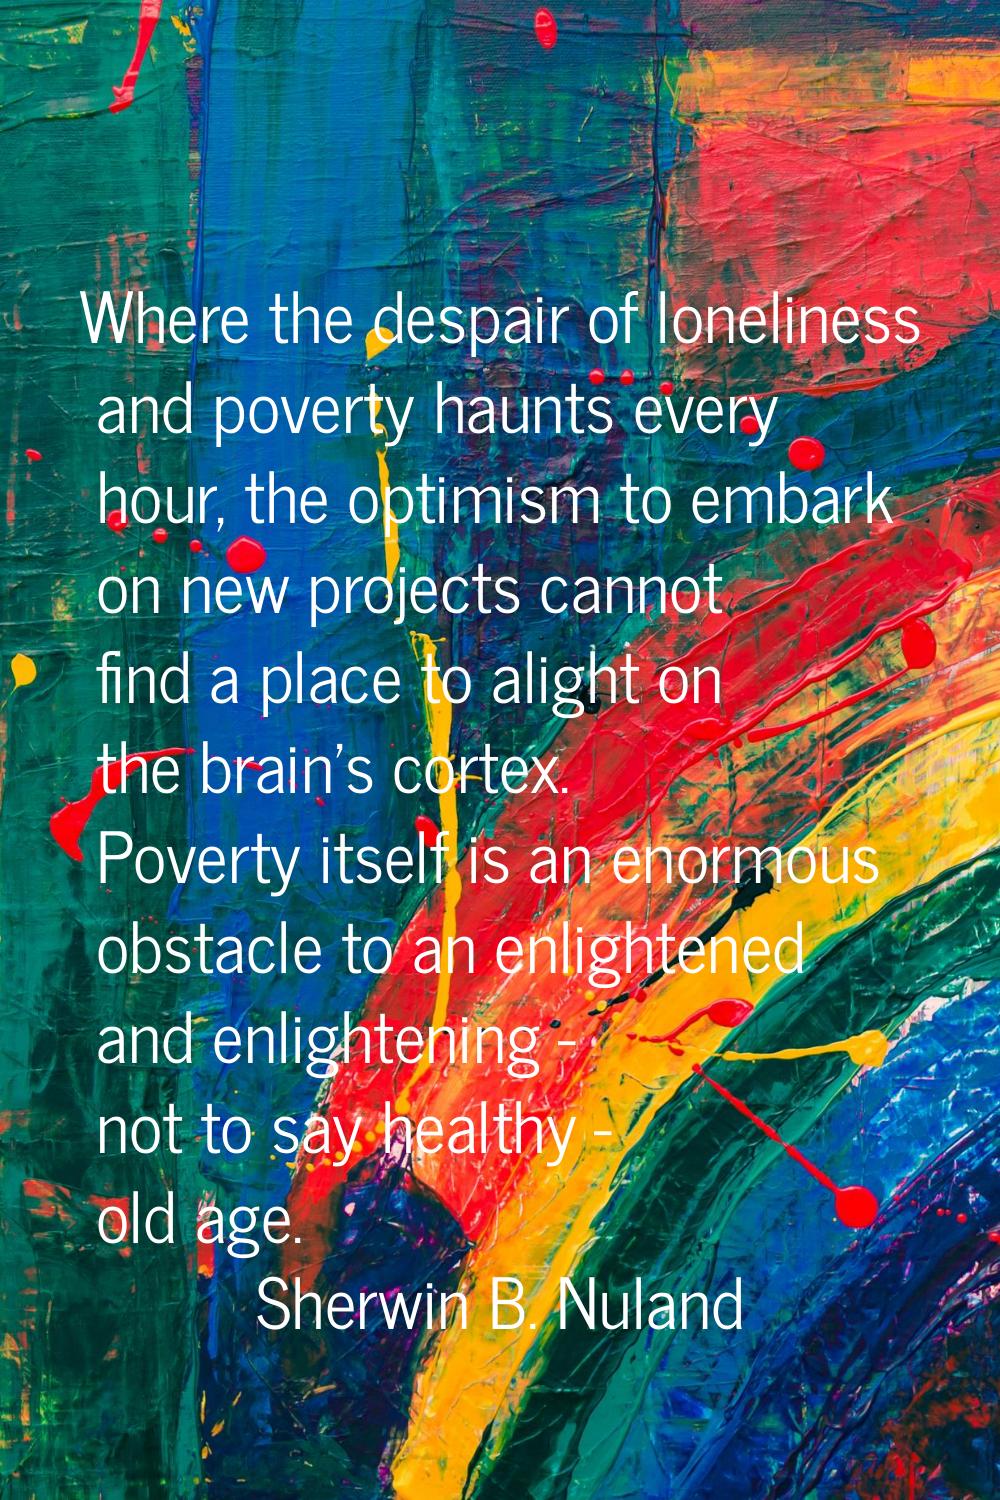 Where the despair of loneliness and poverty haunts every hour, the optimism to embark on new projec